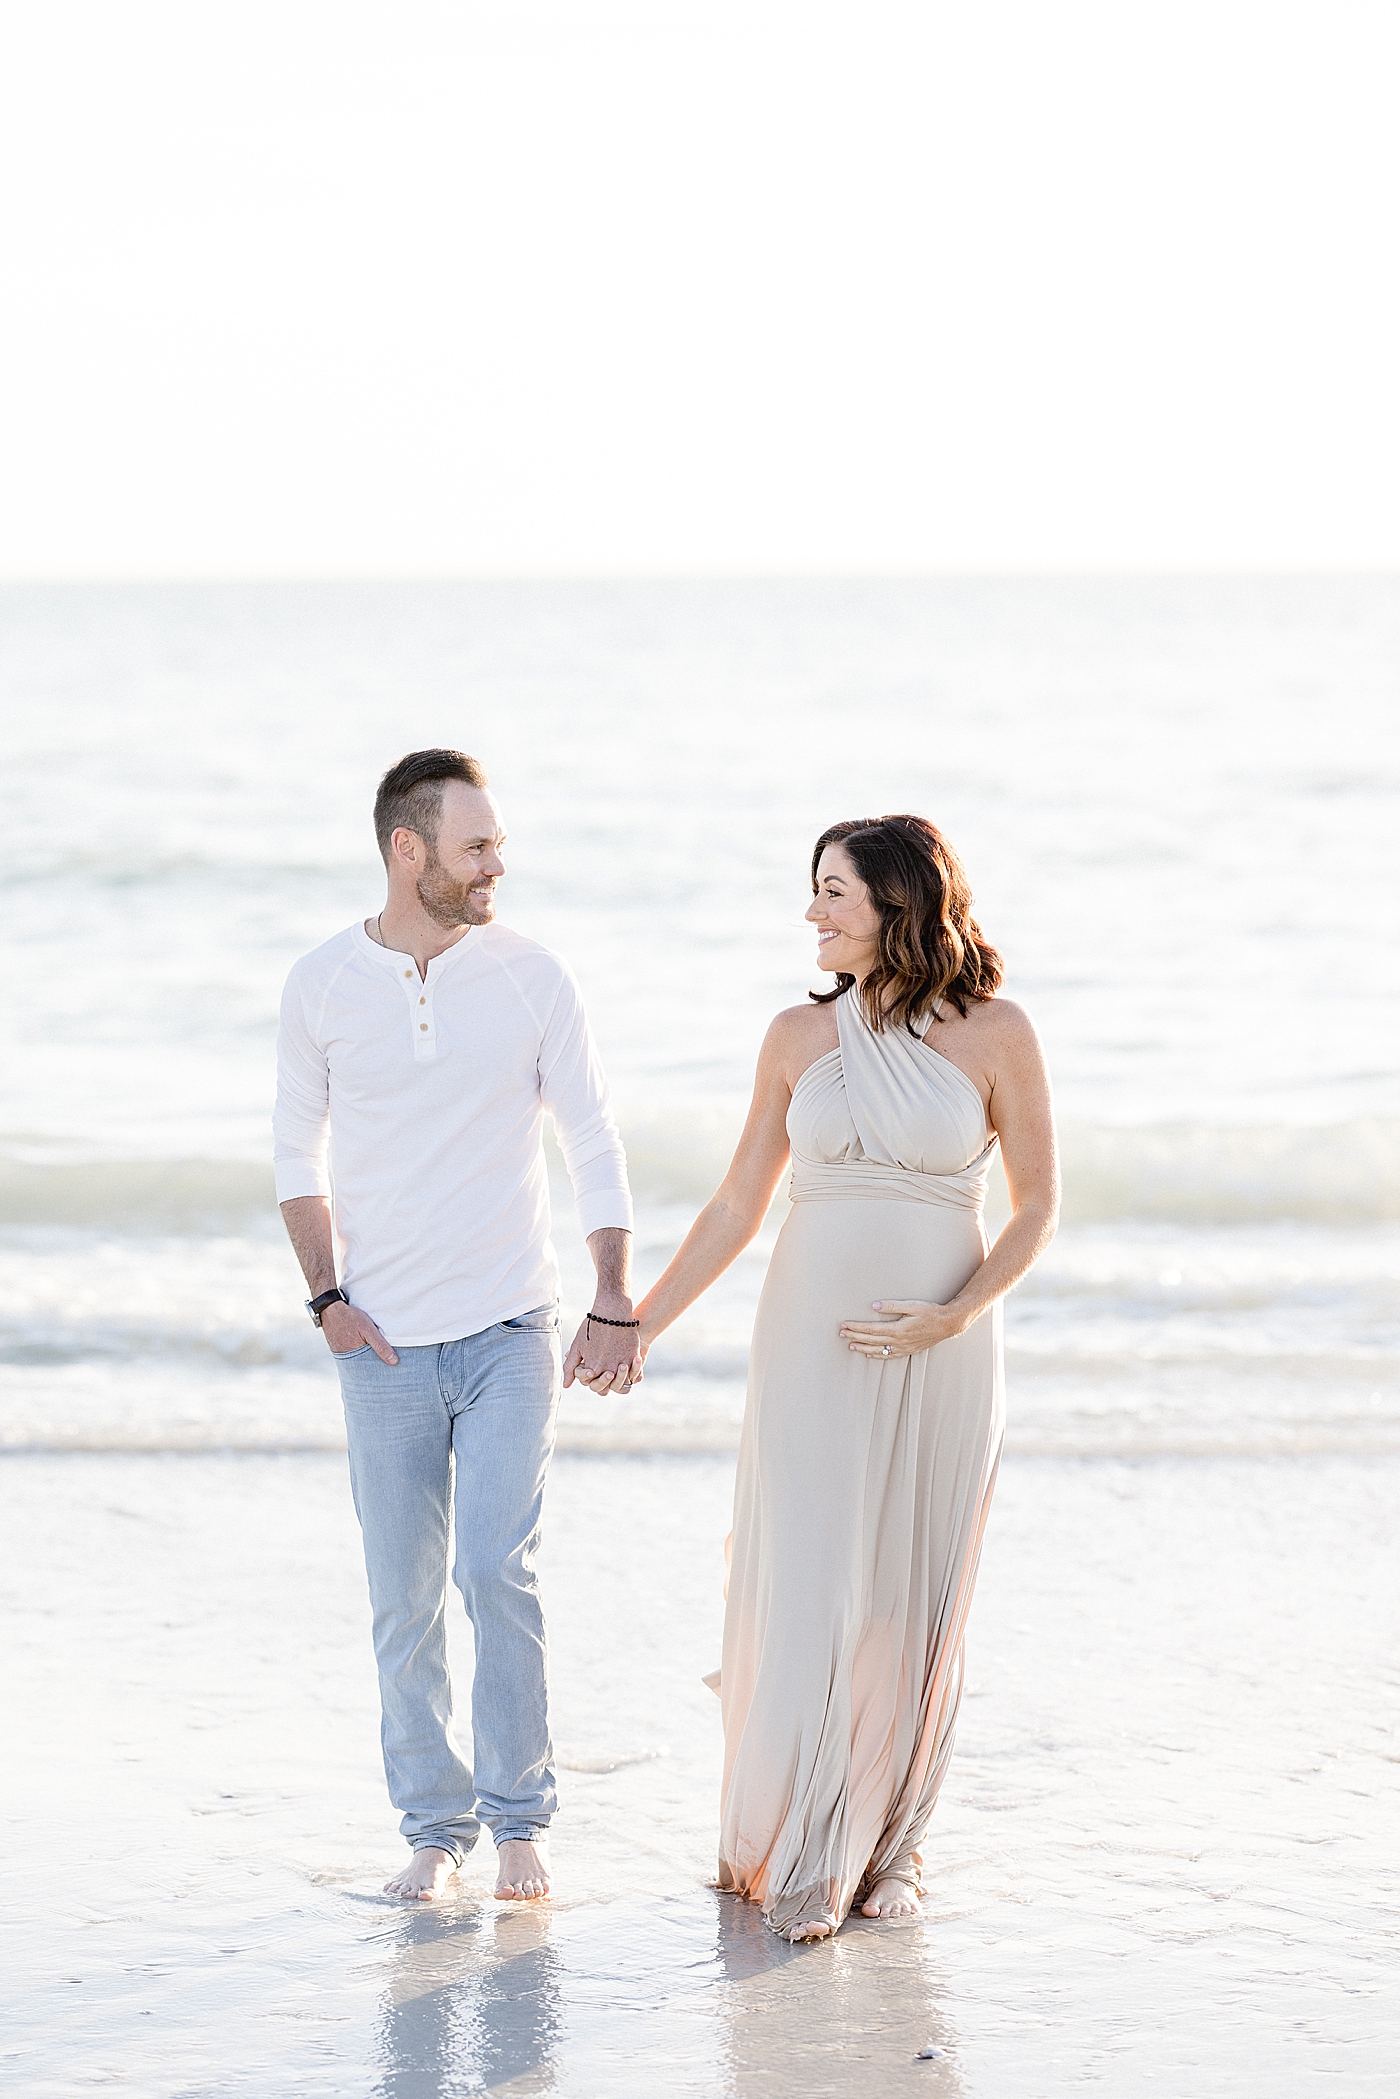 Expecting parents walking on the beach. Photo by Brittany Elise Photography.